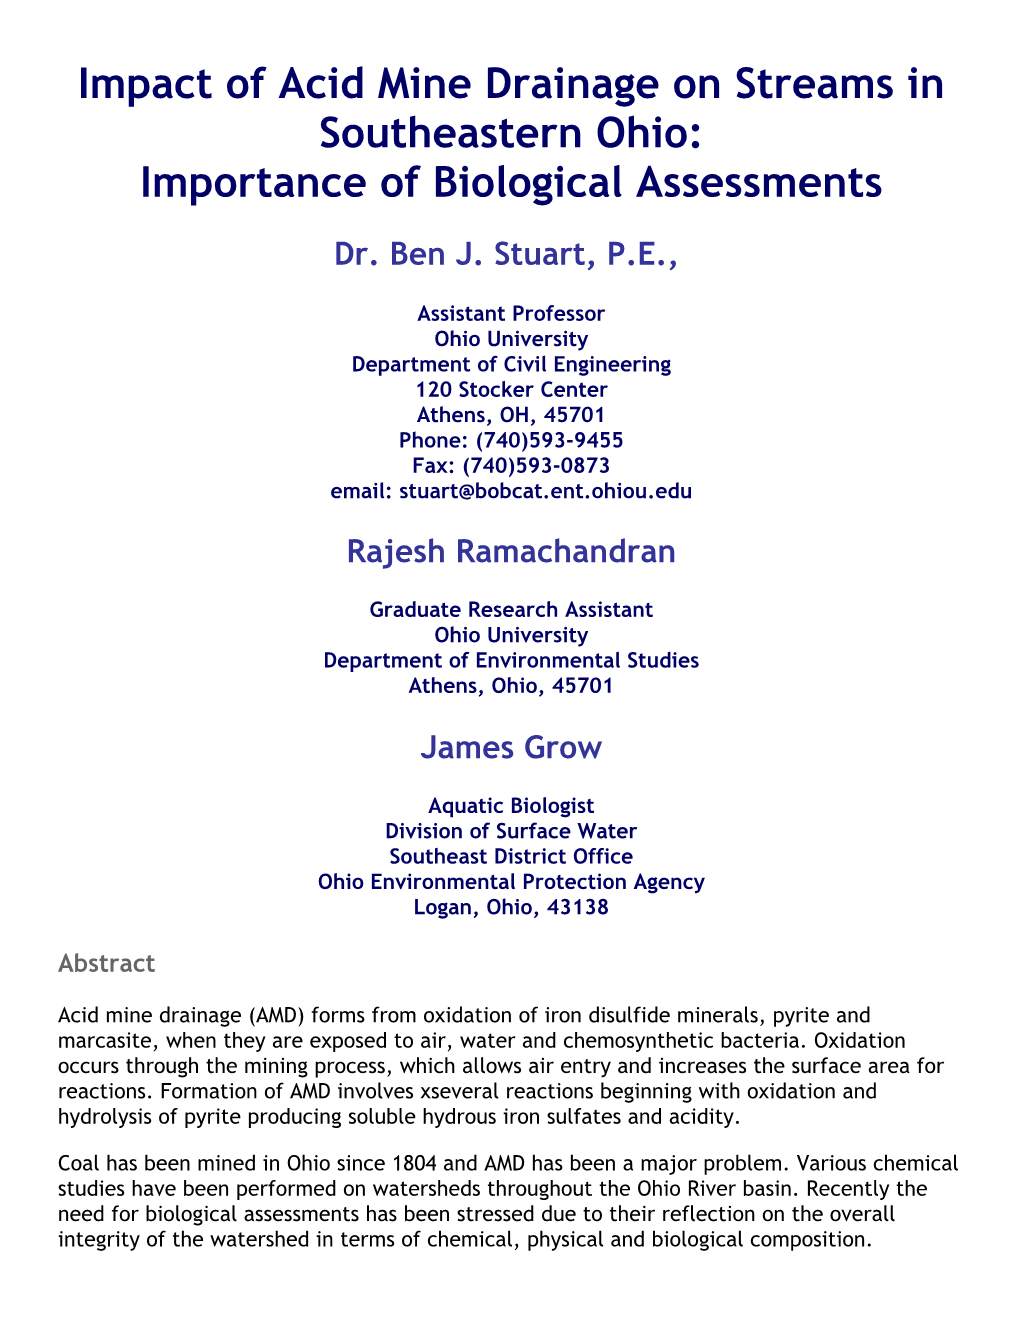 Impact of Acid Mine Drainage on Streams in Southeastern Ohio: Importance of Biological Assessments